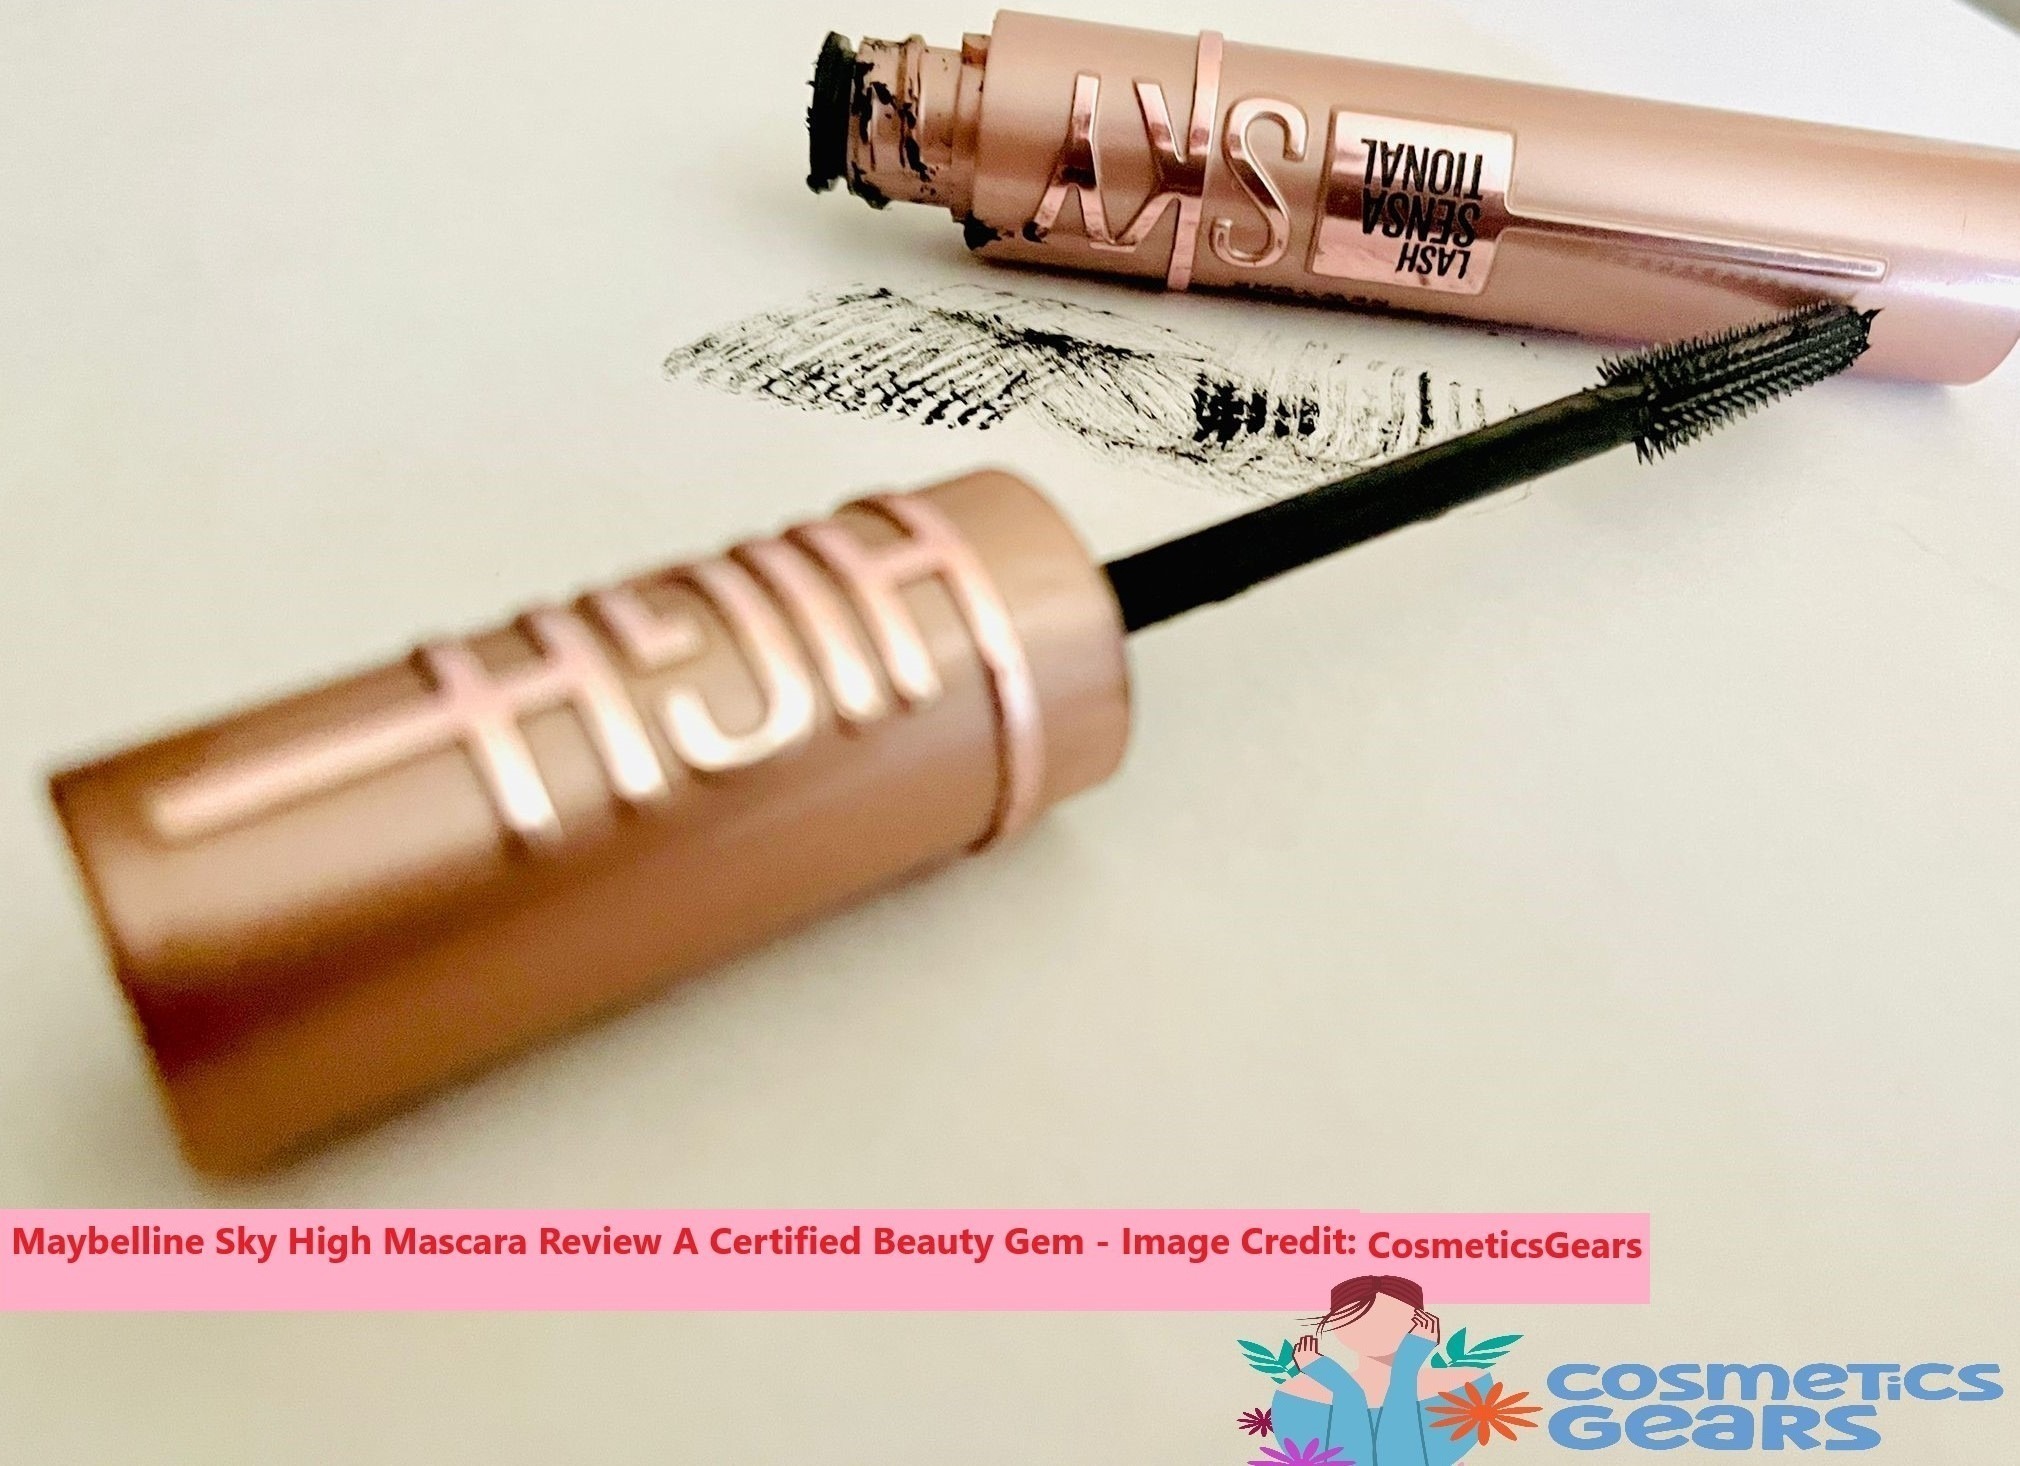 Maybelline Sky High Mascara Review A Certified Beauty Gem